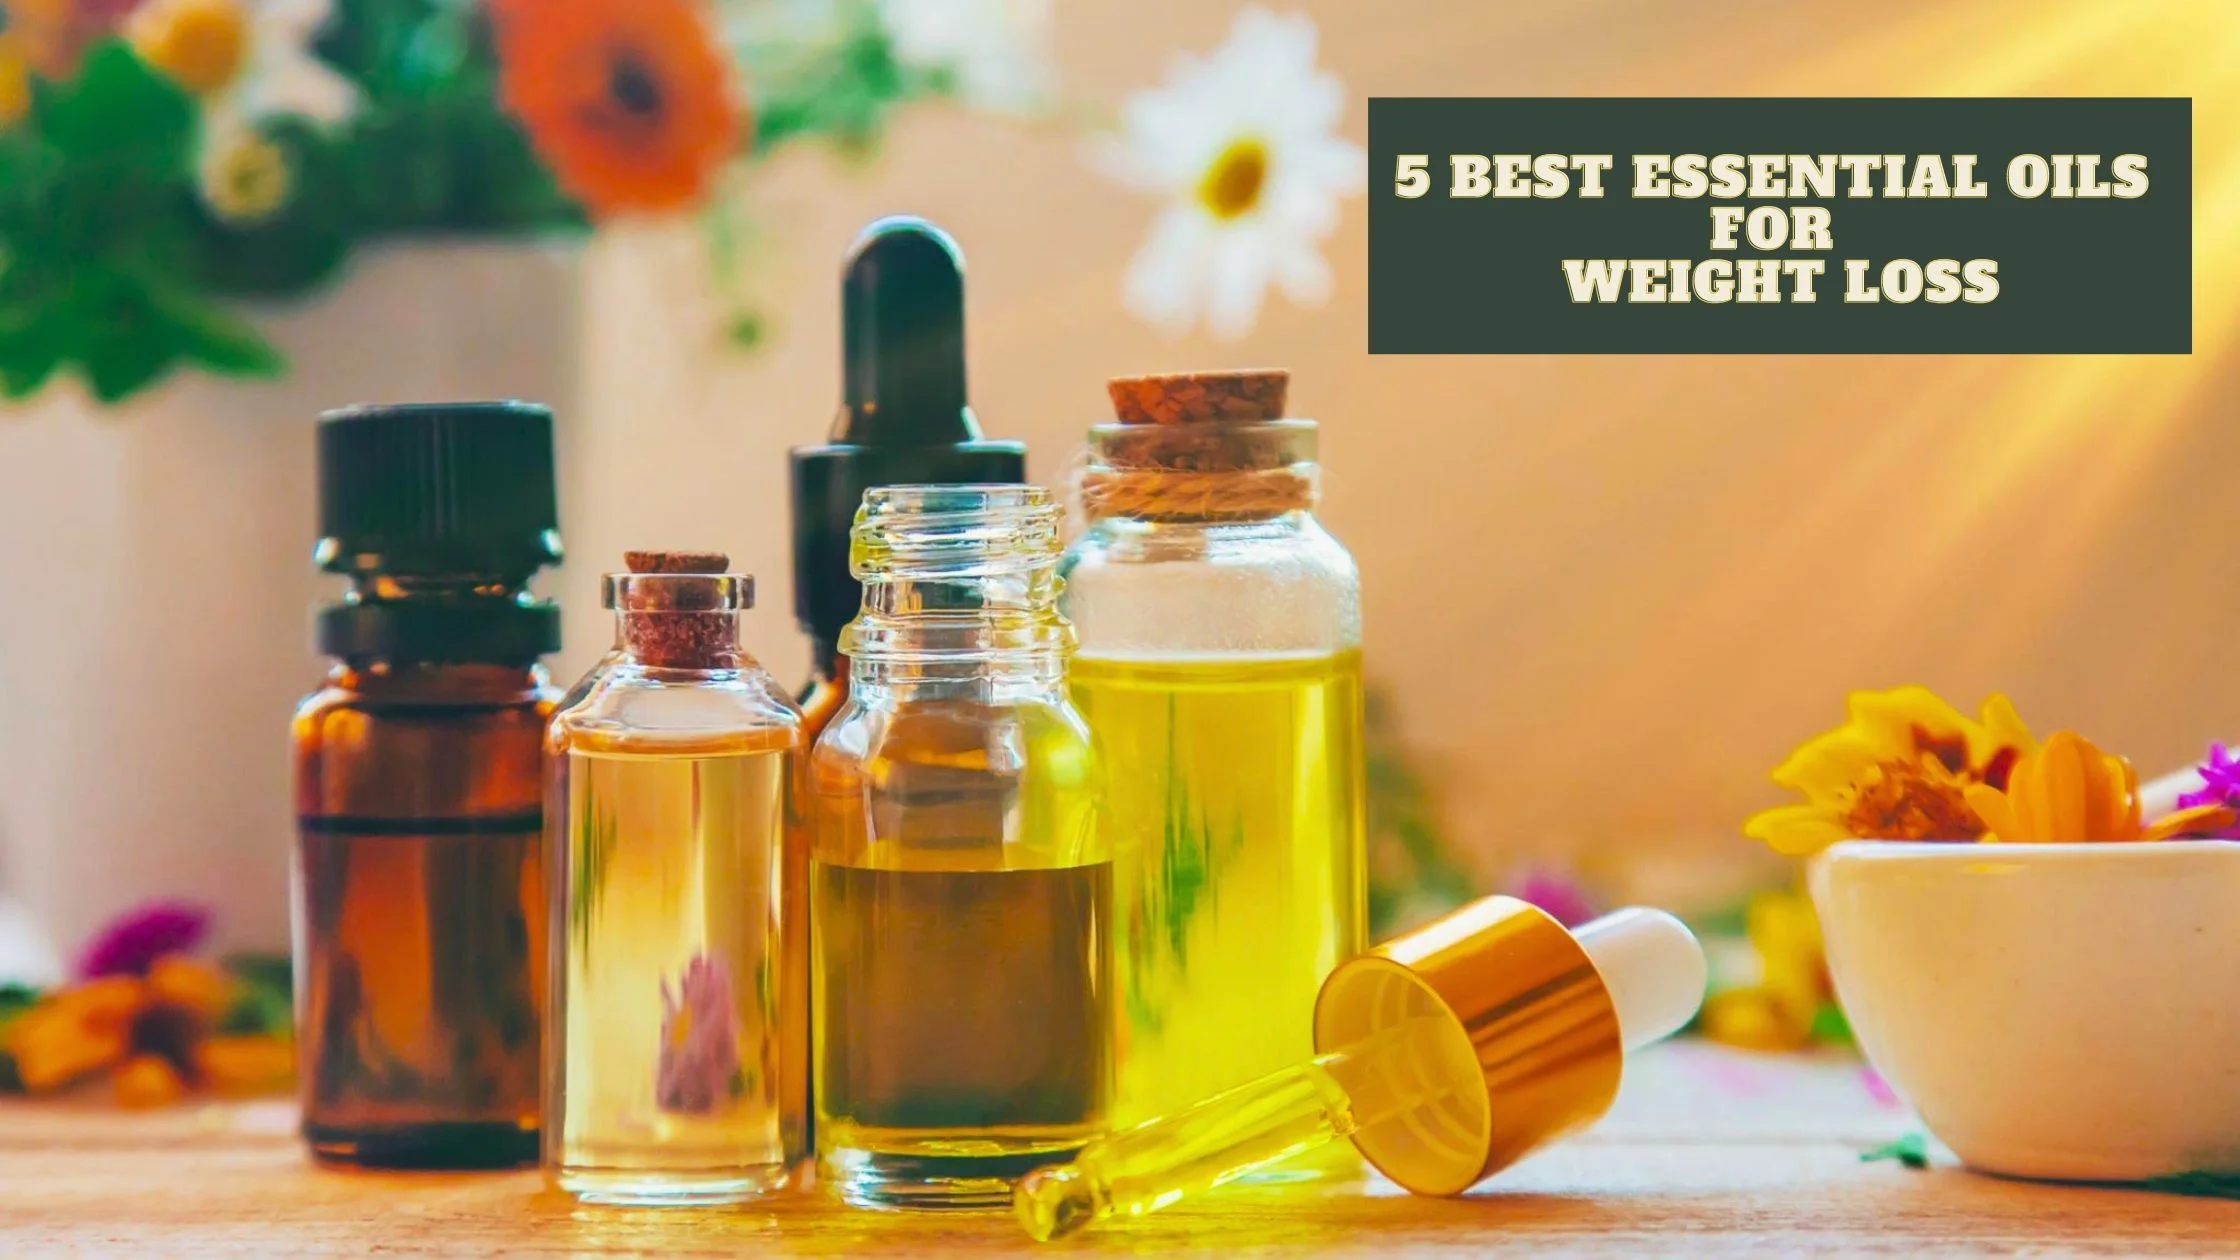 5 Best Essential Oils For Weight Loss